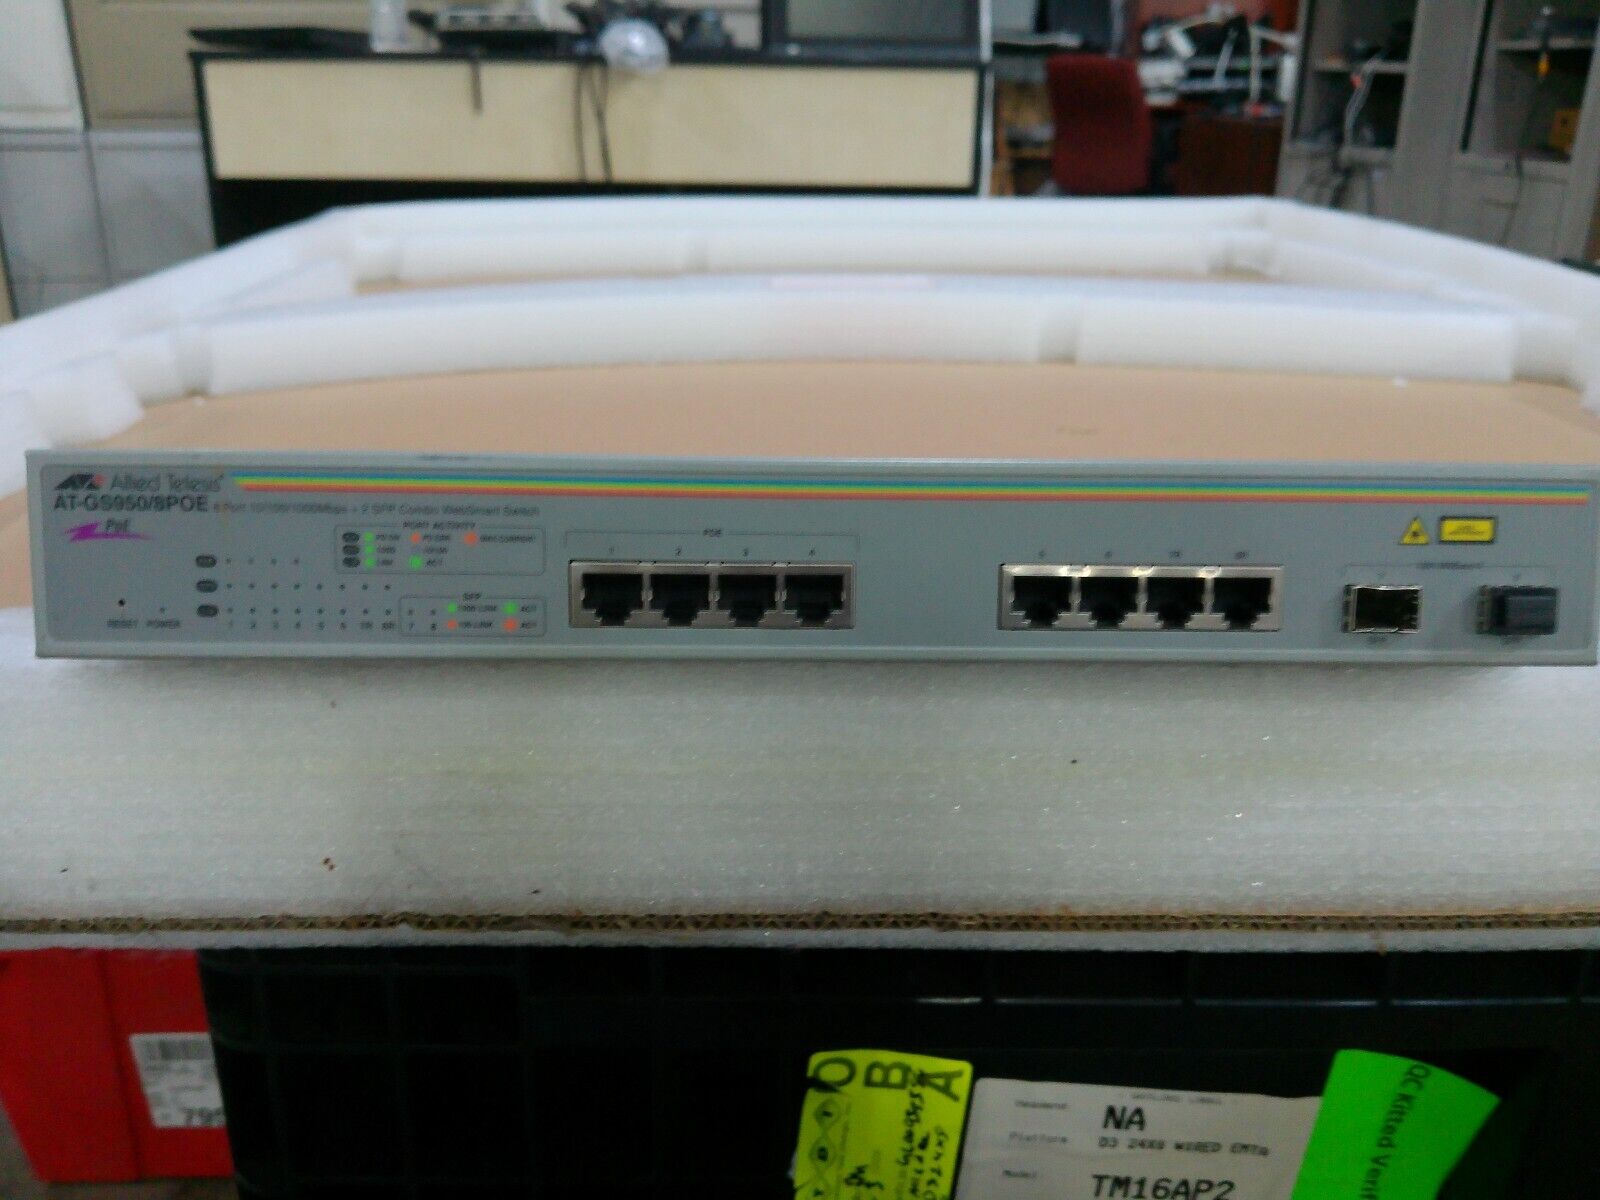 ALLIED TELESIS AT-GS950 / 8POE 8 Ports Web Smart Switch Plus 2 SFP Slots Combo